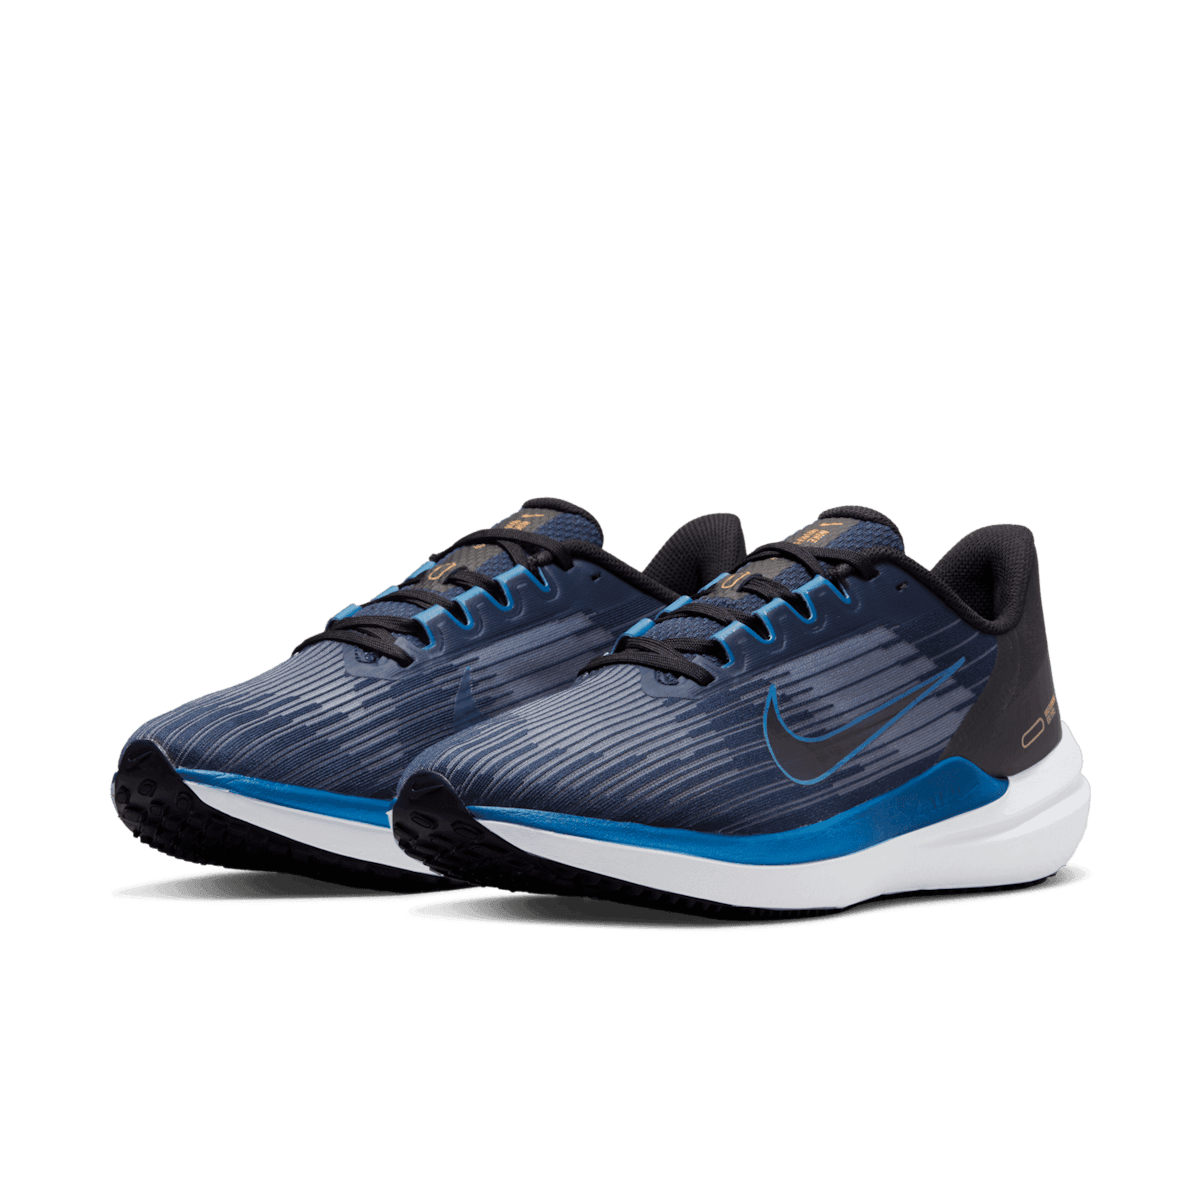 Nike Winflo 9 Road Running Shoes in Blue Angle 2